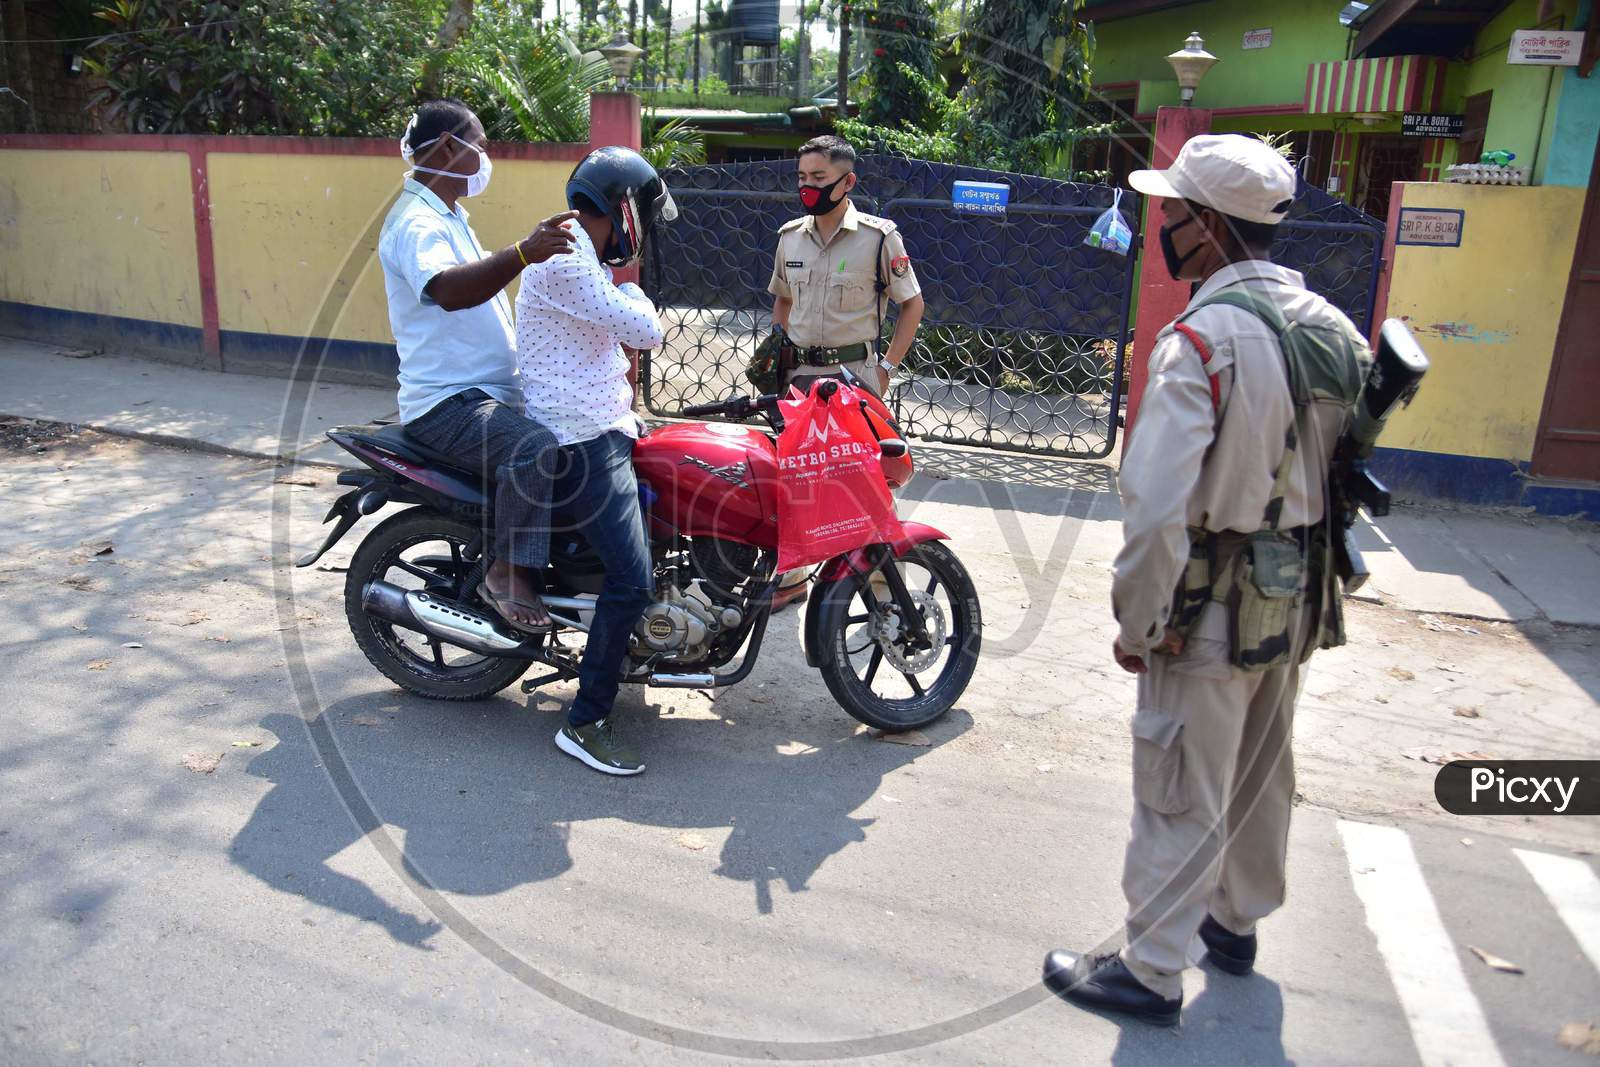 Police Personnel Question Commuters Who Defied Curfew During A 21-Day Nationwide Lockdown, In The Wake Of Coronavirus Pandemic, In Nagaon District Of Assam ,India